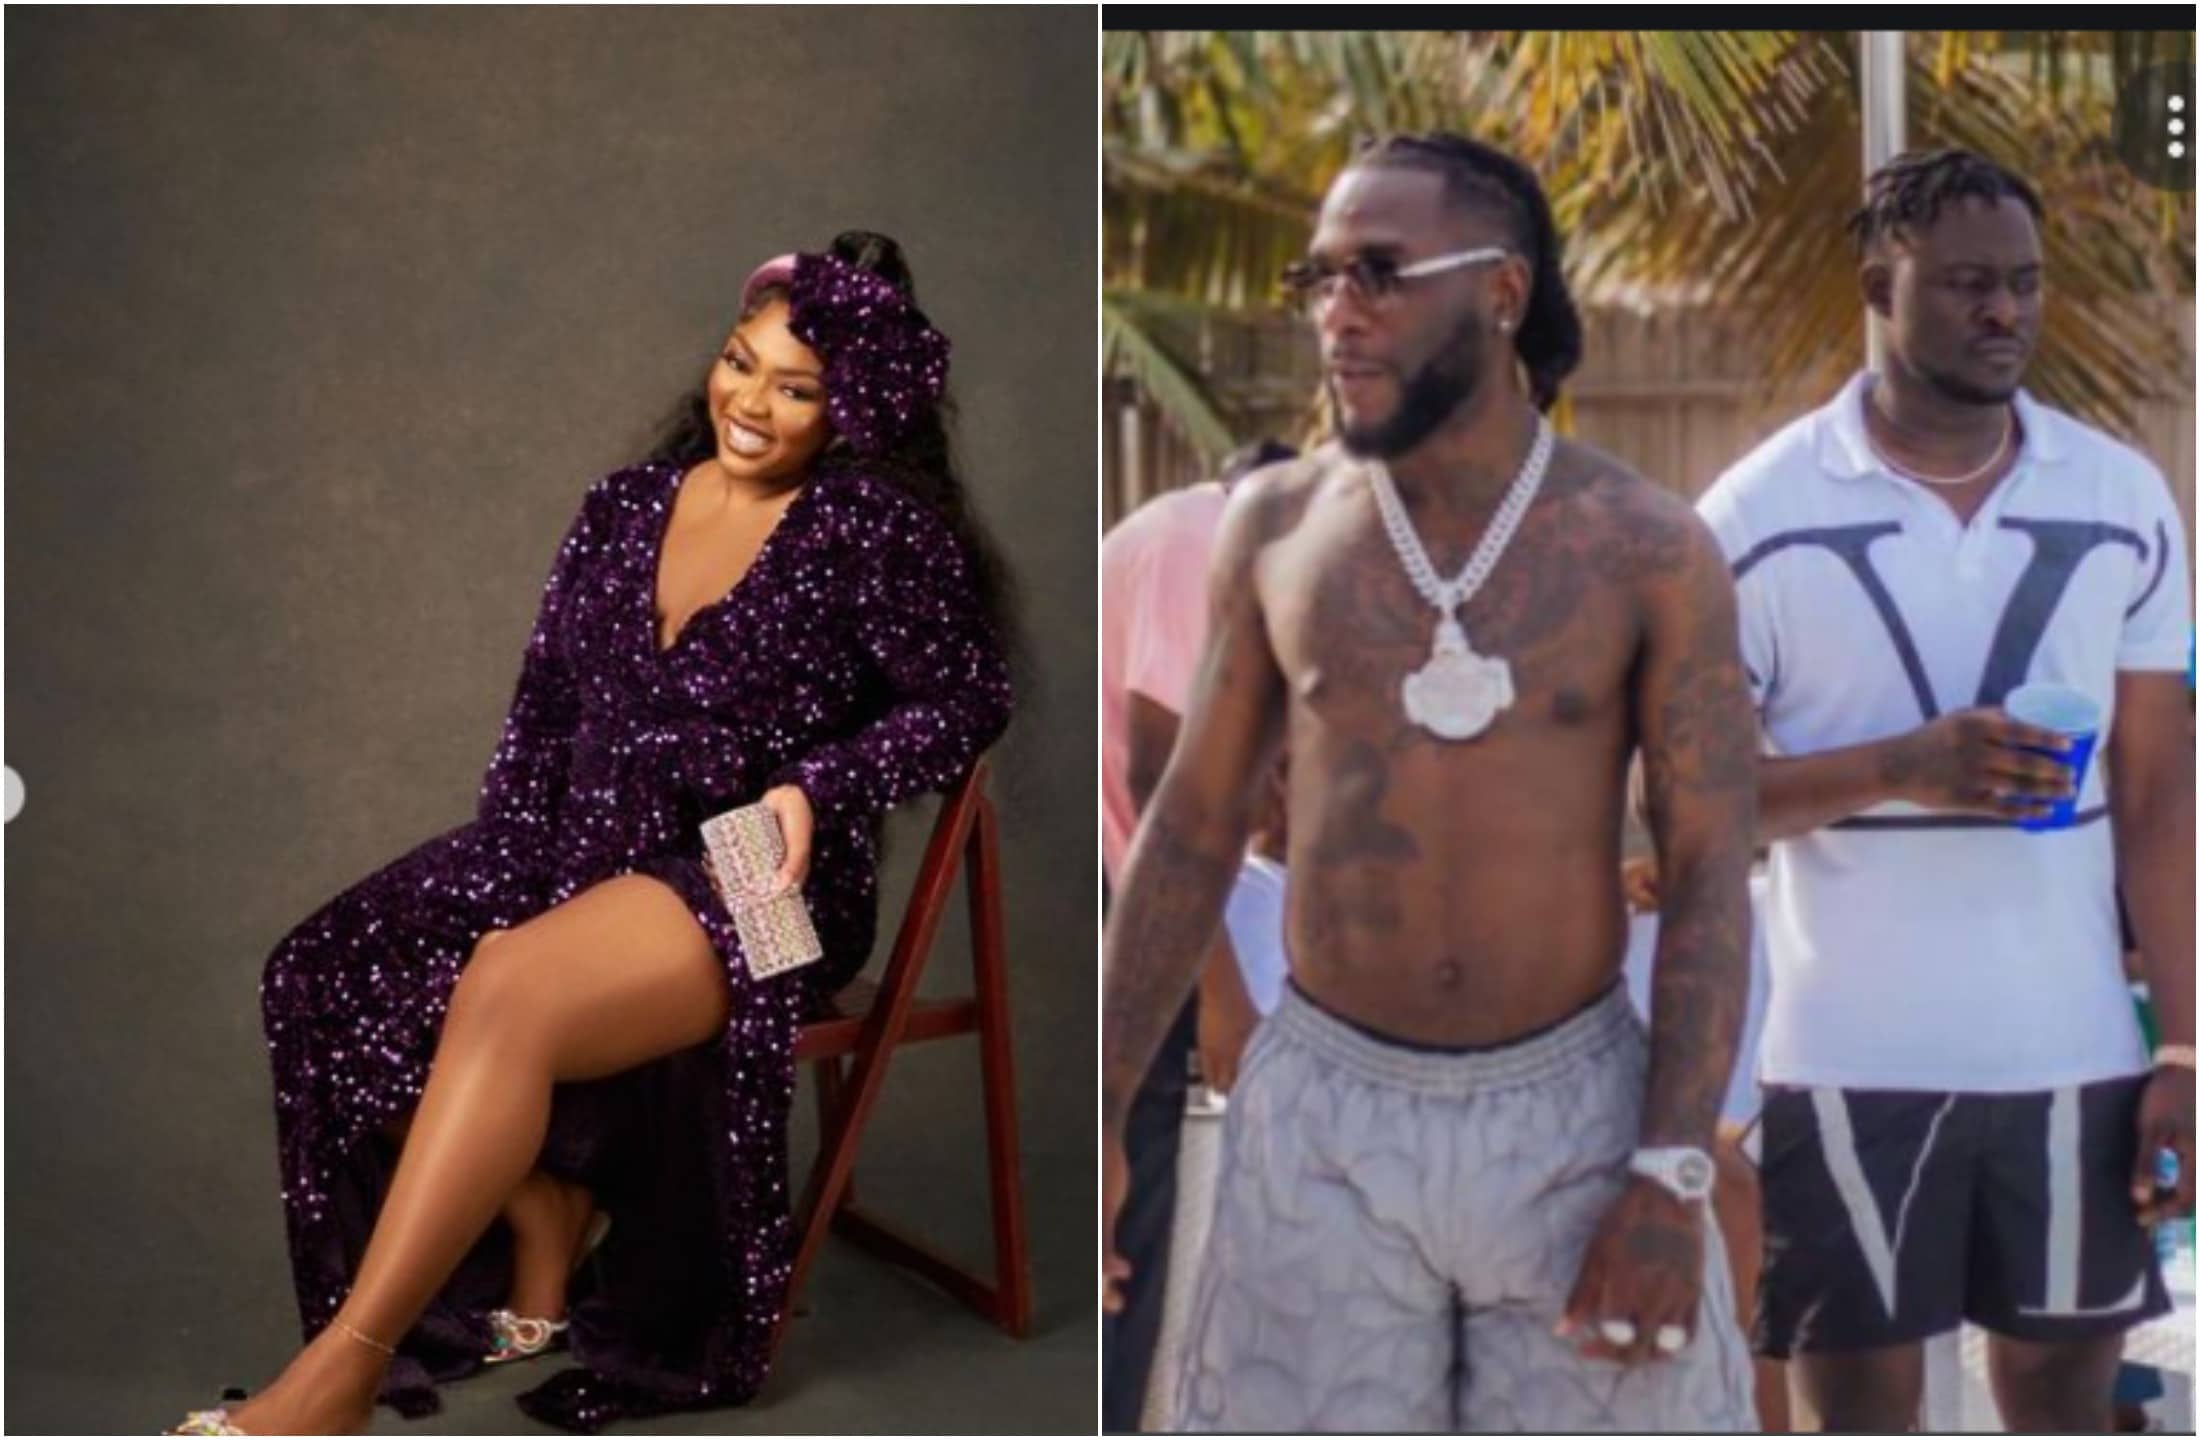 Caramel gets N1m from her boyfriend and Burna Boy’s PA